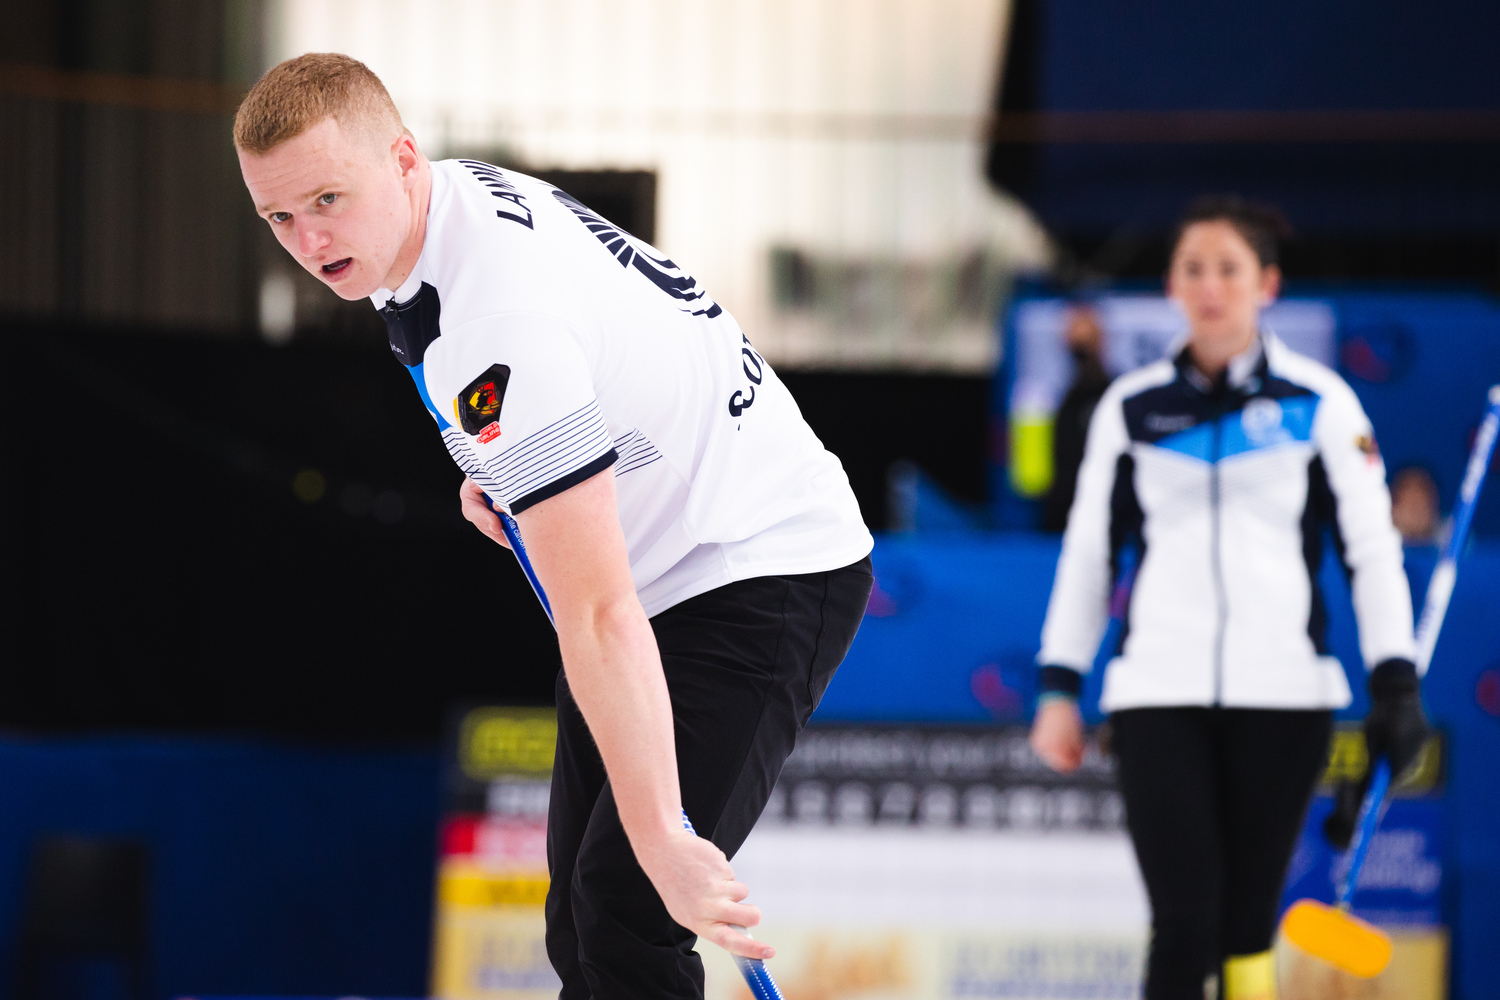 Scotland remain unbeaten at World Mixed Doubles Curling Championship